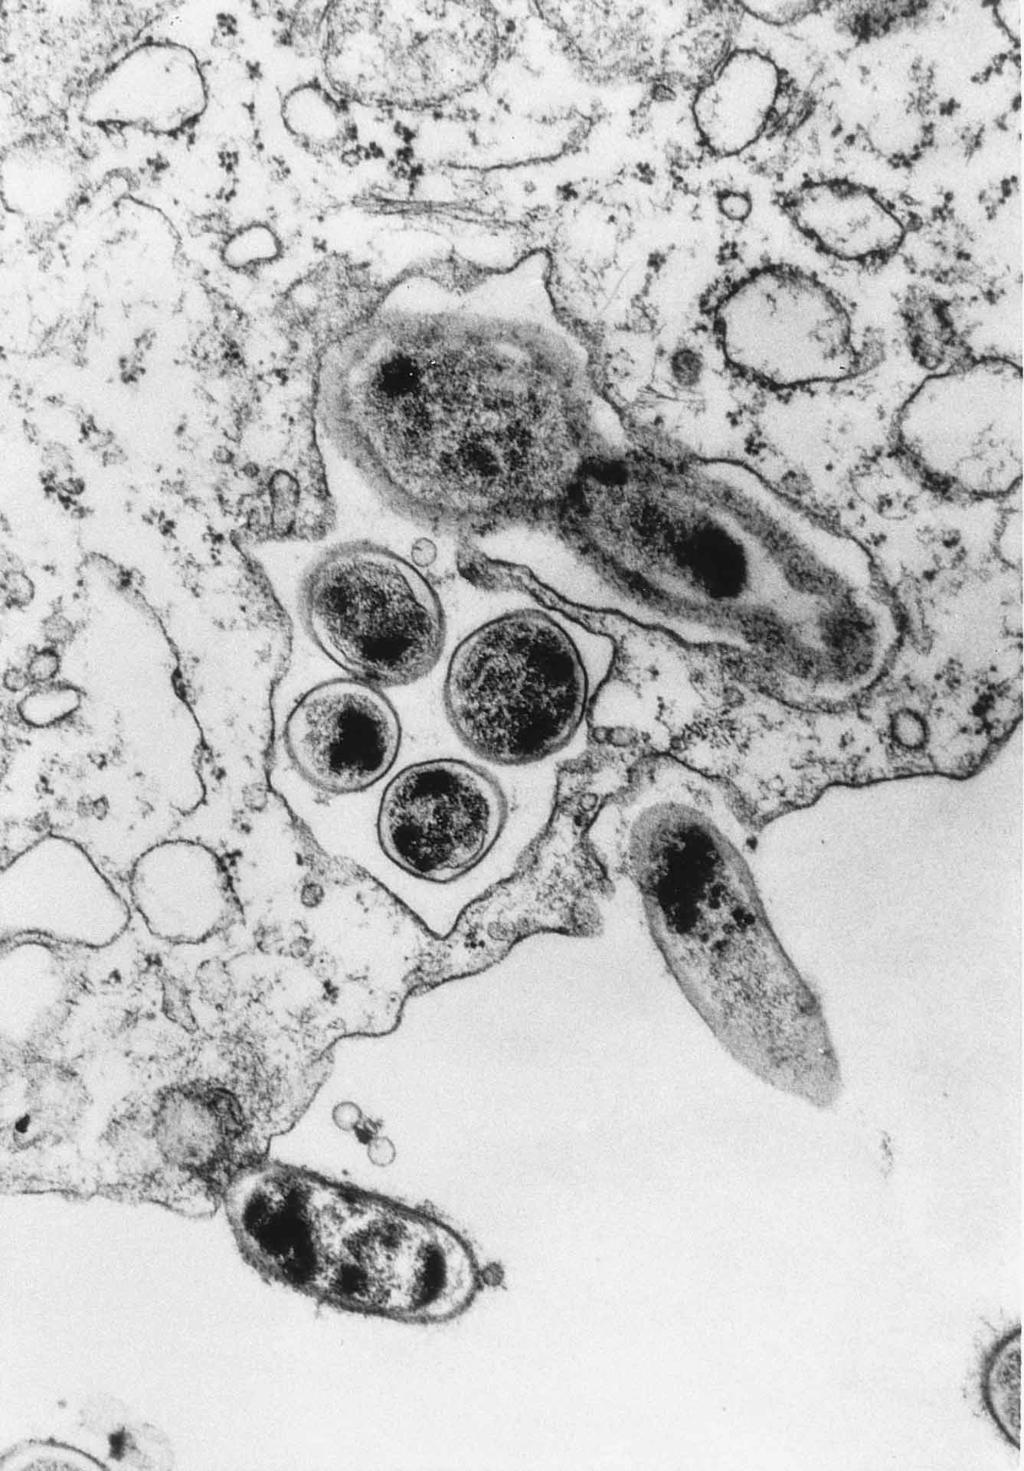 VOL. 10, 1997 BARTONELLA SPP. AS EMERGING HUMAN PATHOGENS 205 Downloaded from http://cmr.asm.org/ FIG. 1. Electron micrograph of low-passage-number (piliated) B. henselae associated with HEp-2 cells.